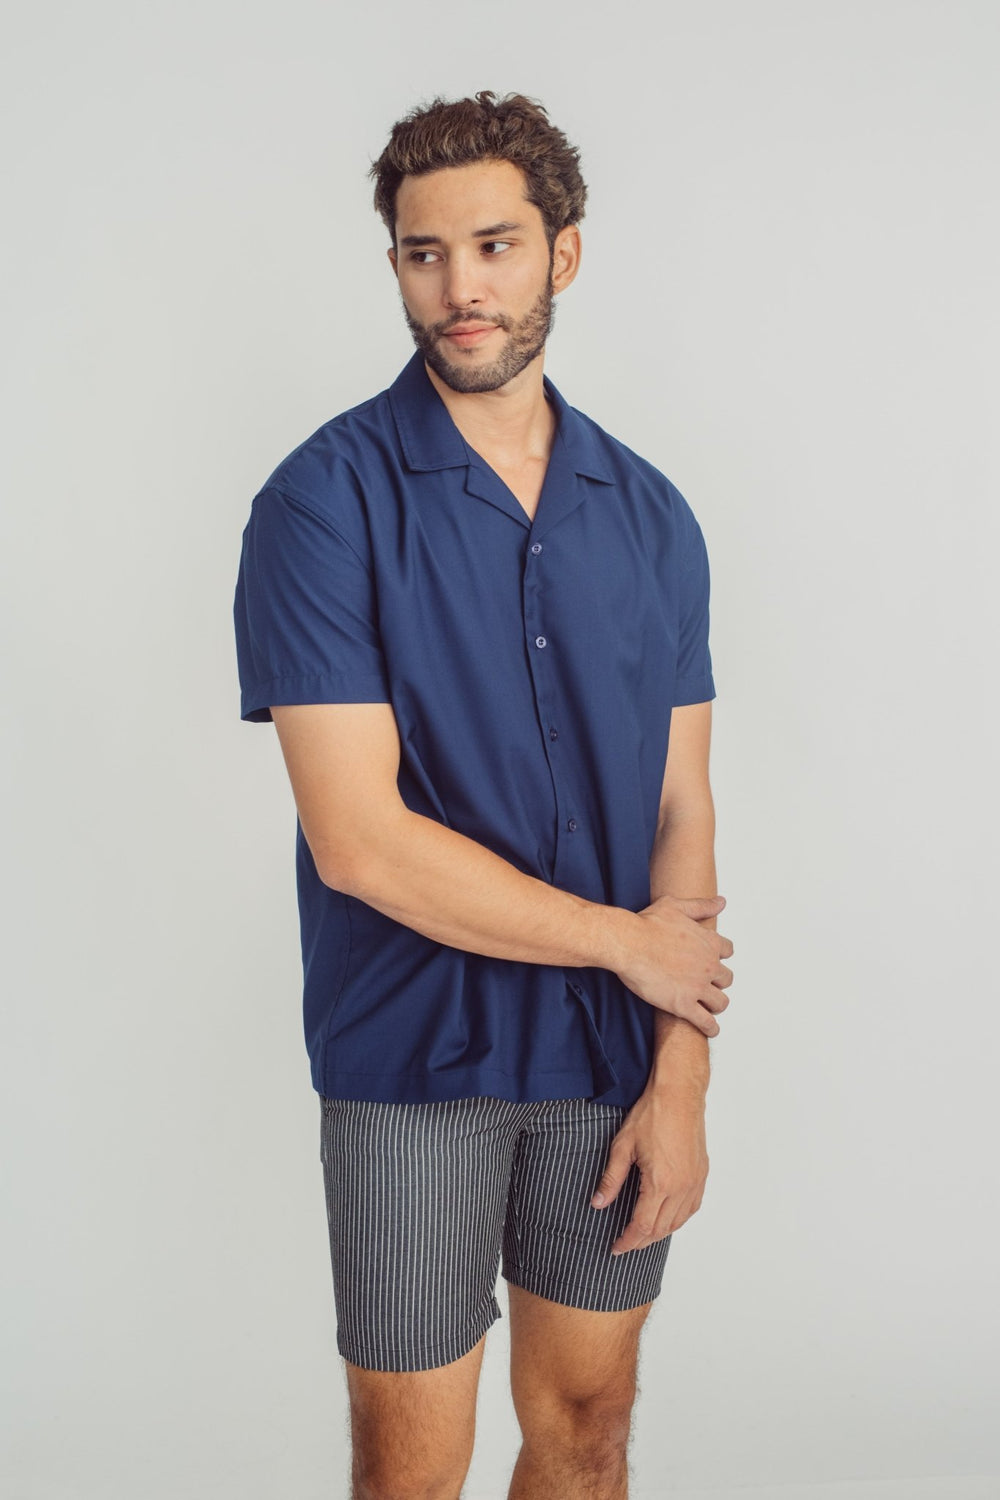 Freddie Button Down Relaxed Fit - Mossimo PH